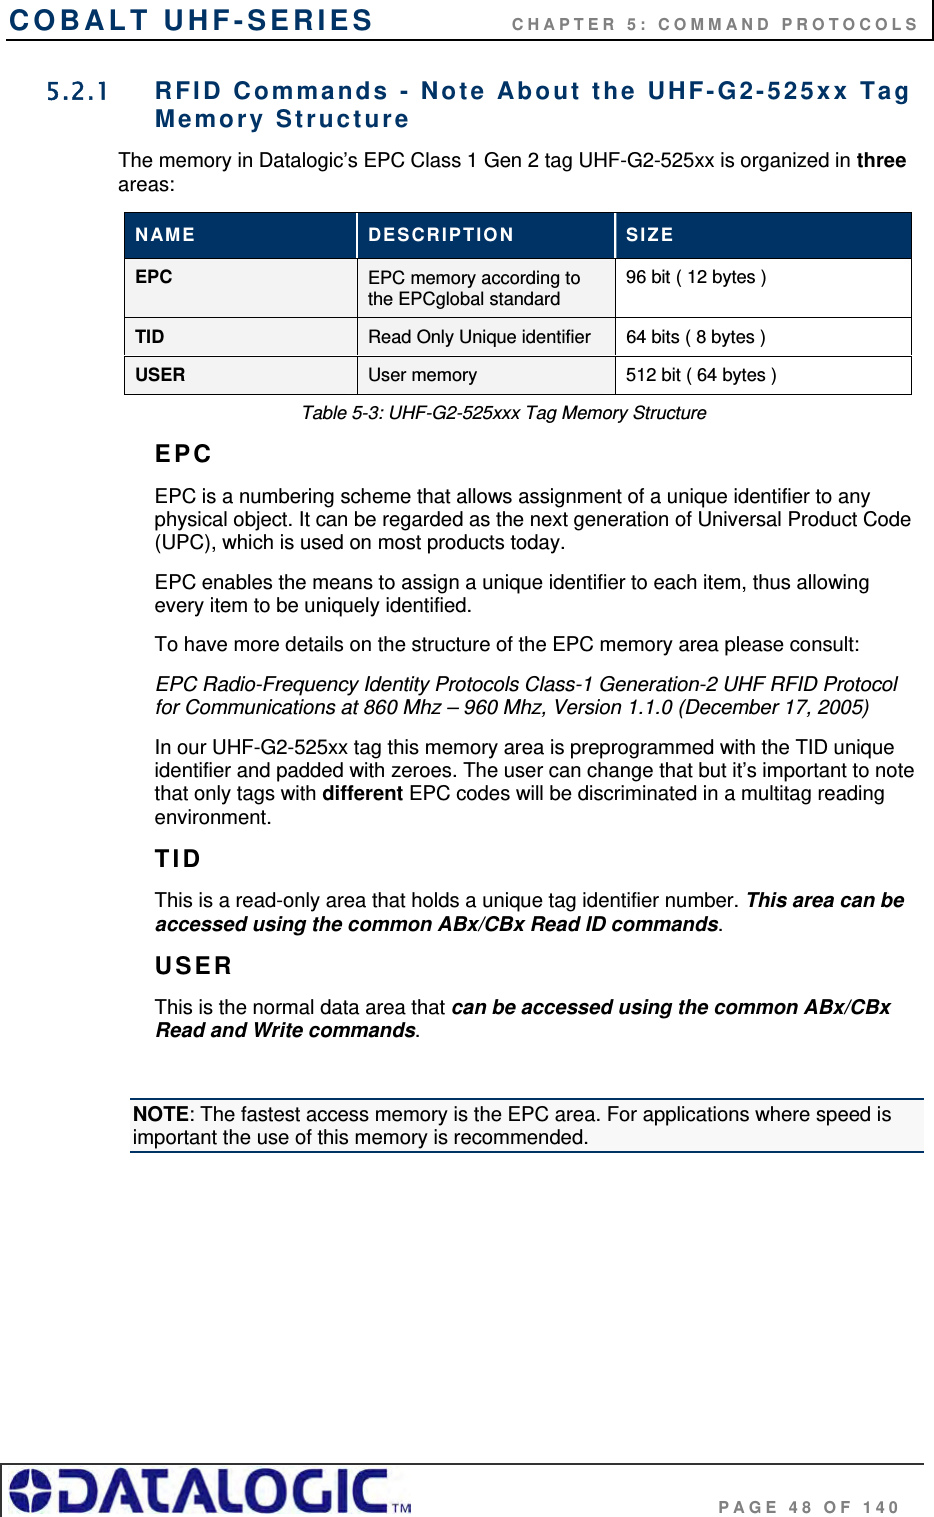 COBALT UHF-SERIES    CHAPTER 5: COMMAND PROTOCOLS                                     PAGE 48 OF 140 5.2.1  RFID Commands - Note About the UHF-G2-525xx Tag Memory Structure The memory in Datalogic’s EPC Class 1 Gen 2 tag UHF-G2-525xx is organized in three areas: NAME  DESCRIPTION  SIZE EPC EPC memory according to the EPCglobal standard 96 bit ( 12 bytes )  TID Read Only Unique identifier  64 bits ( 8 bytes ) USER User memory  512 bit ( 64 bytes ) Table 5-3: UHF-G2-525xxx Tag Memory Structure EPC EPC is a numbering scheme that allows assignment of a unique identifier to any physical object. It can be regarded as the next generation of Universal Product Code (UPC), which is used on most products today.  EPC enables the means to assign a unique identifier to each item, thus allowing every item to be uniquely identified.  To have more details on the structure of the EPC memory area please consult: EPC Radio-Frequency Identity Protocols Class-1 Generation-2 UHF RFID Protocol for Communications at 860 Mhz – 960 Mhz, Version 1.1.0 (December 17, 2005) In our UHF-G2-525xx tag this memory area is preprogrammed with the TID unique identifier and padded with zeroes. The user can change that but it’s important to note that only tags with different EPC codes will be discriminated in a multitag reading environment. TID This is a read-only area that holds a unique tag identifier number. This area can be accessed using the common ABx/CBx Read ID commands. USER This is the normal data area that can be accessed using the common ABx/CBx Read and Write commands.   NOTE: The fastest access memory is the EPC area. For applications where speed is important the use of this memory is recommended.    